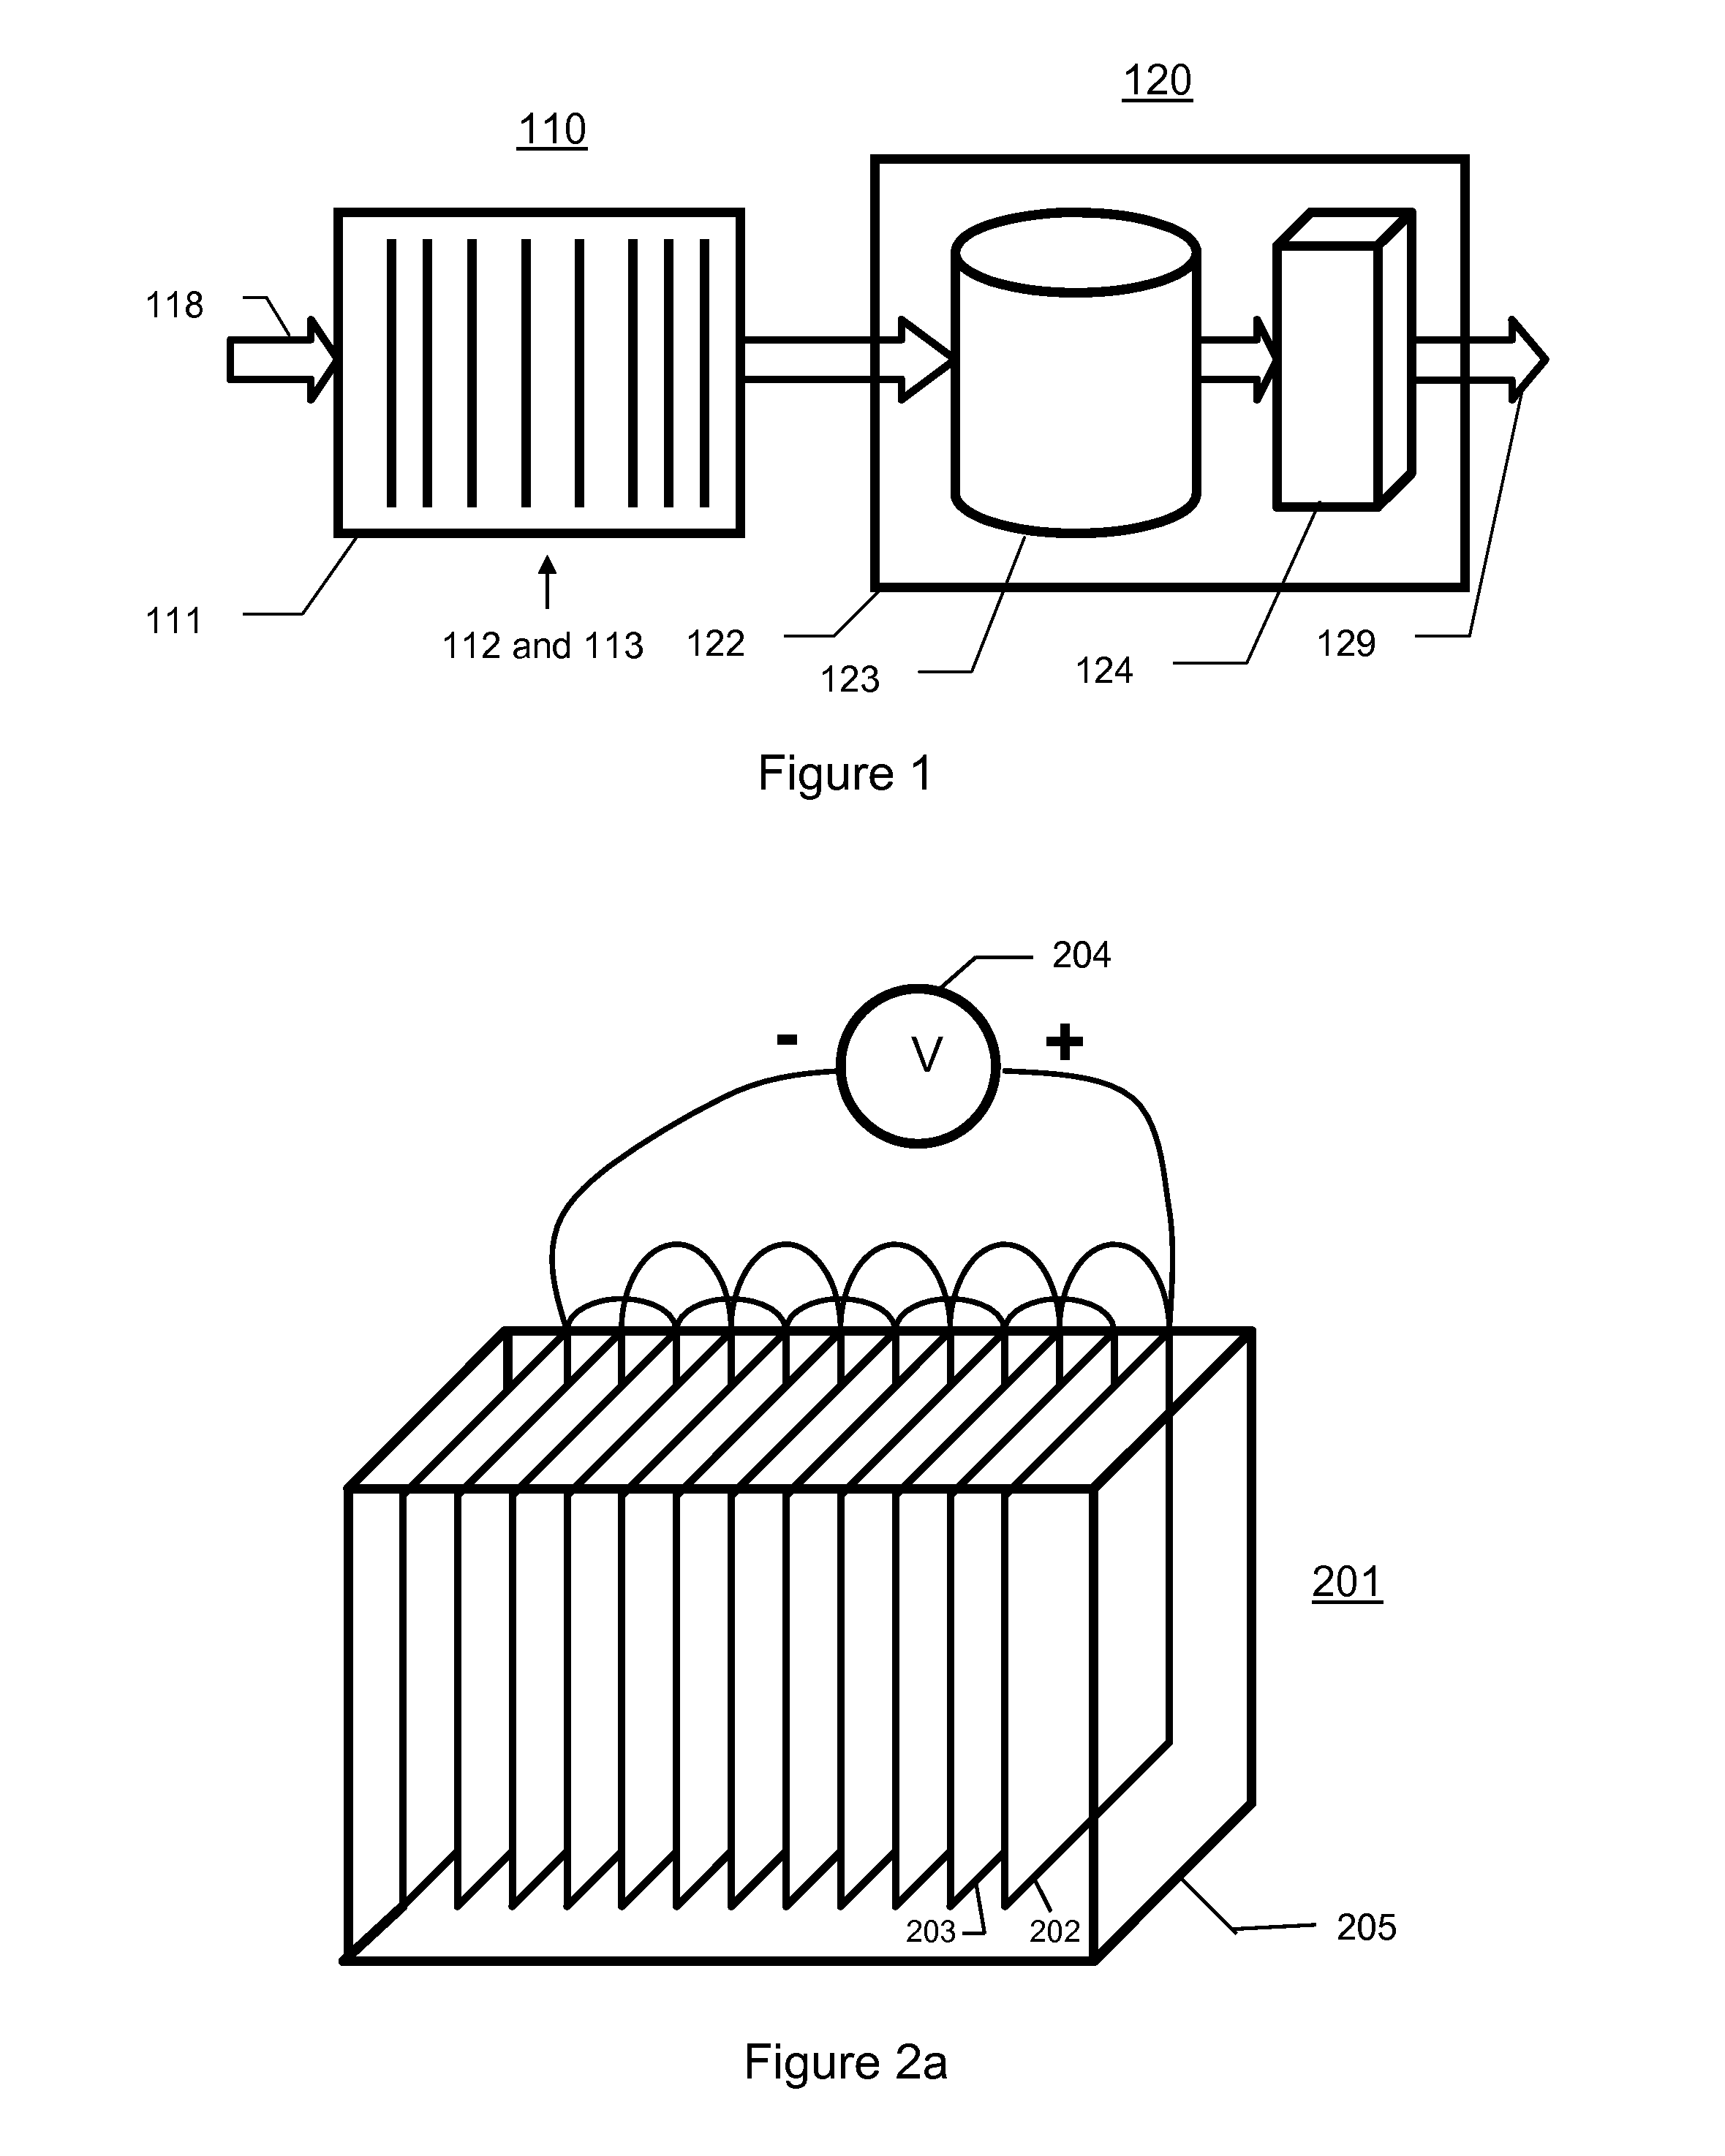 Method and Apparatus for Decontamination of Fluid with One or More High Purity Electrodes